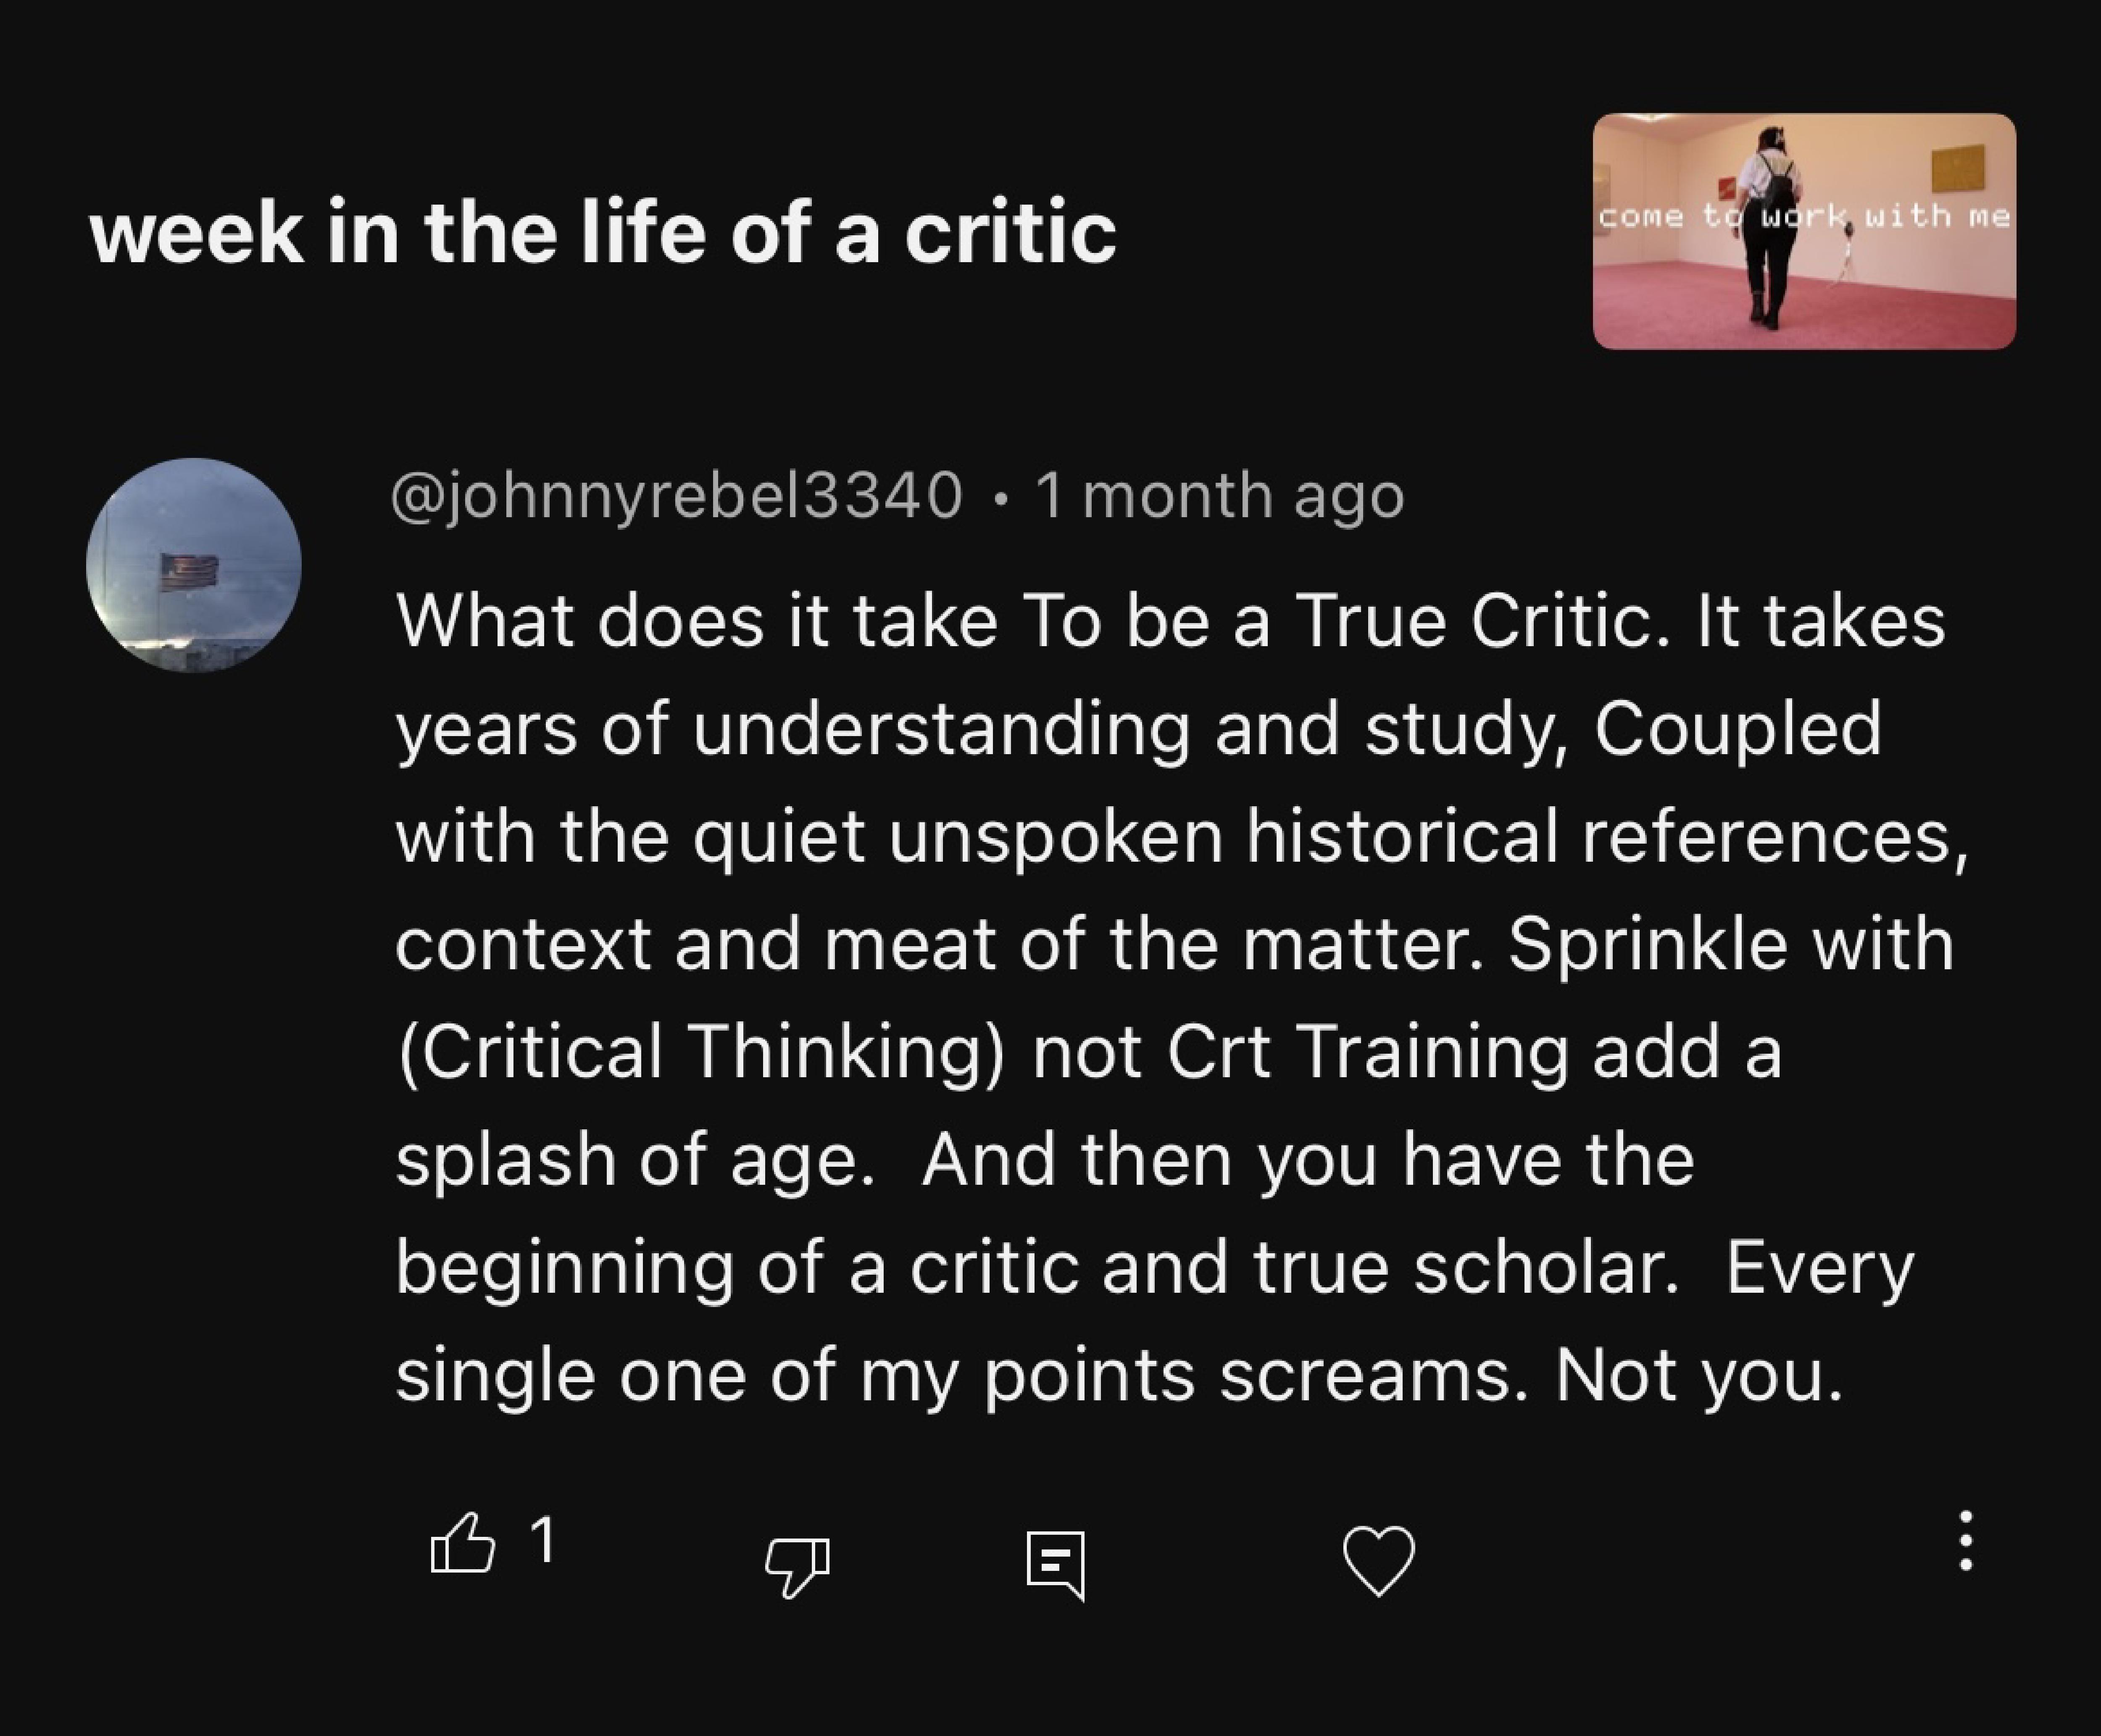 a youtube comment that says: What does it take To be a True Critic. It takes years of understanding and study, Coupled with the quiet unspoken historical references, context and meat of the matter. Sprinkle with (Critical Thinking) not Crt Training add a splash of age. And then vou have the beginning of a critic and true scholar. Every single one of my points screams. Not you.